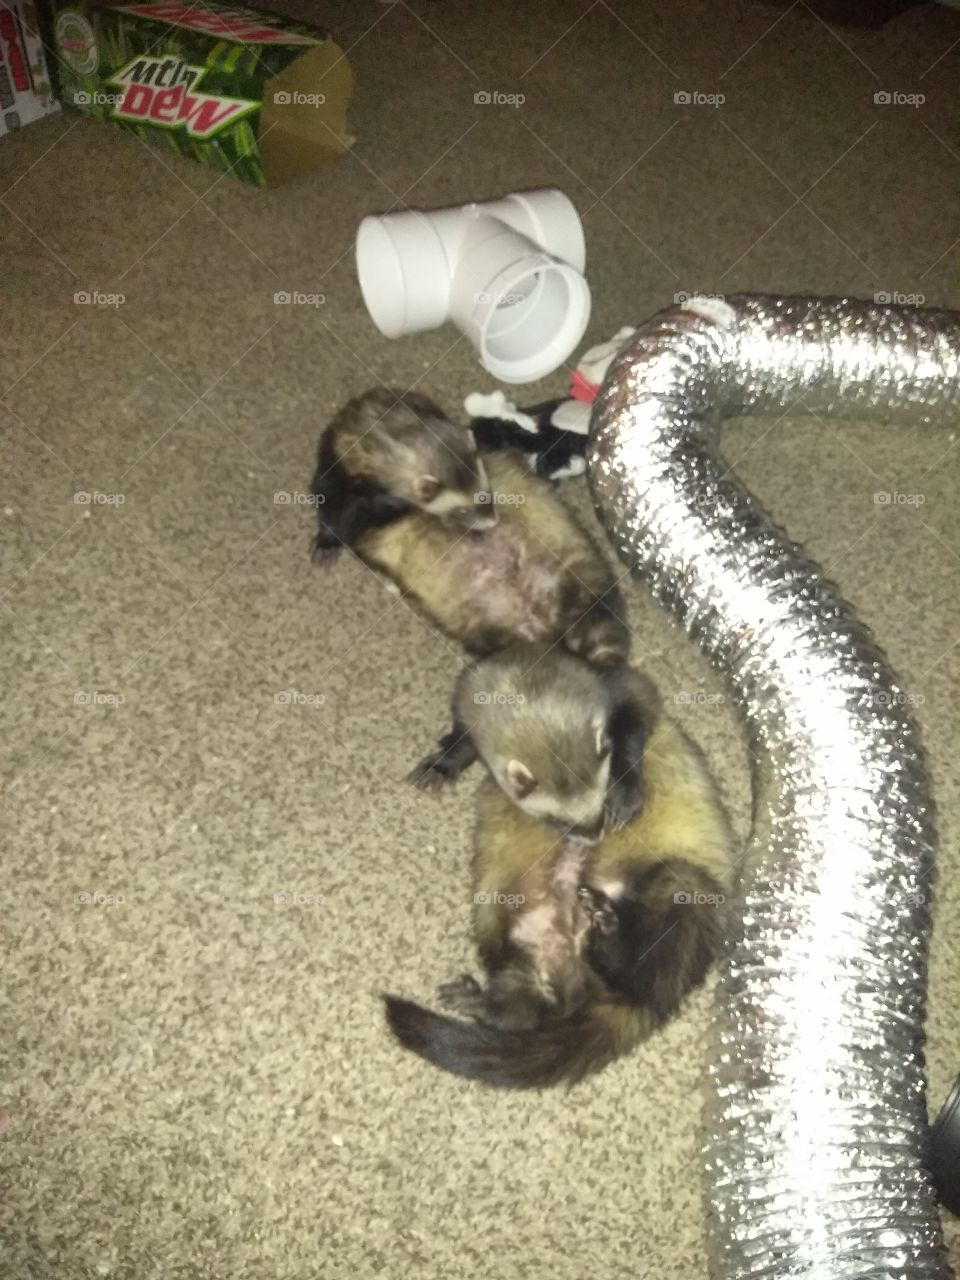 my ferrets licking salmon oil off of themselves